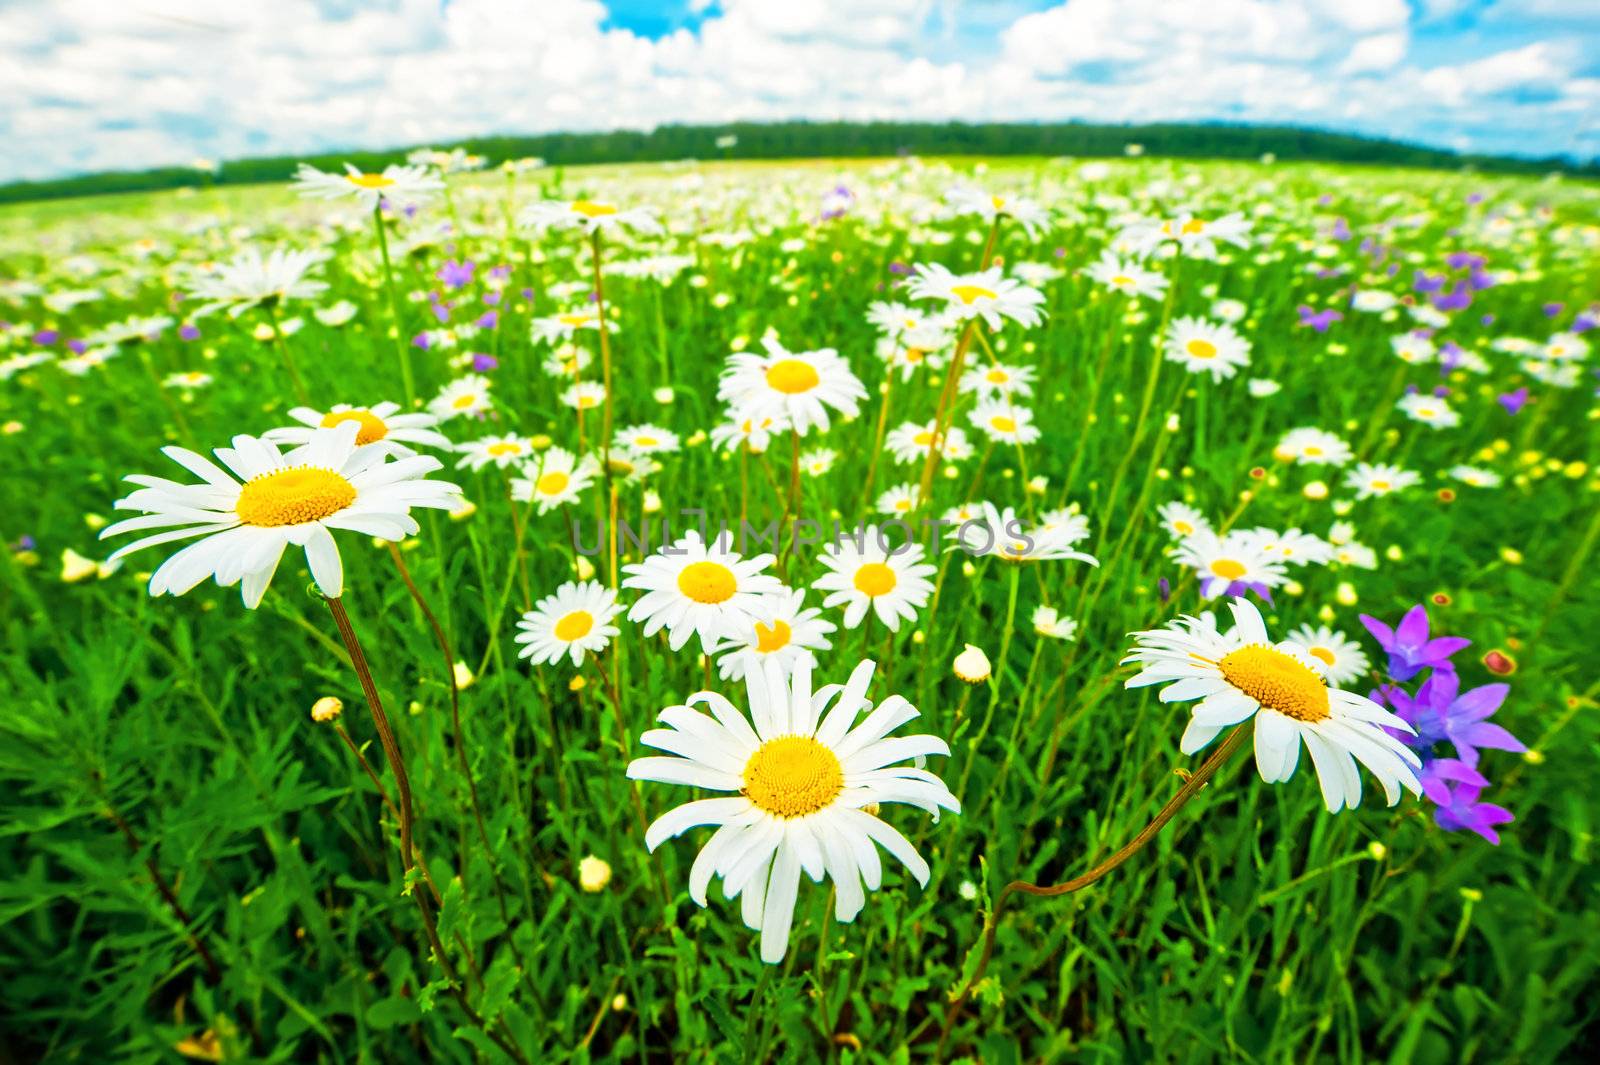 The meadow of daisies.